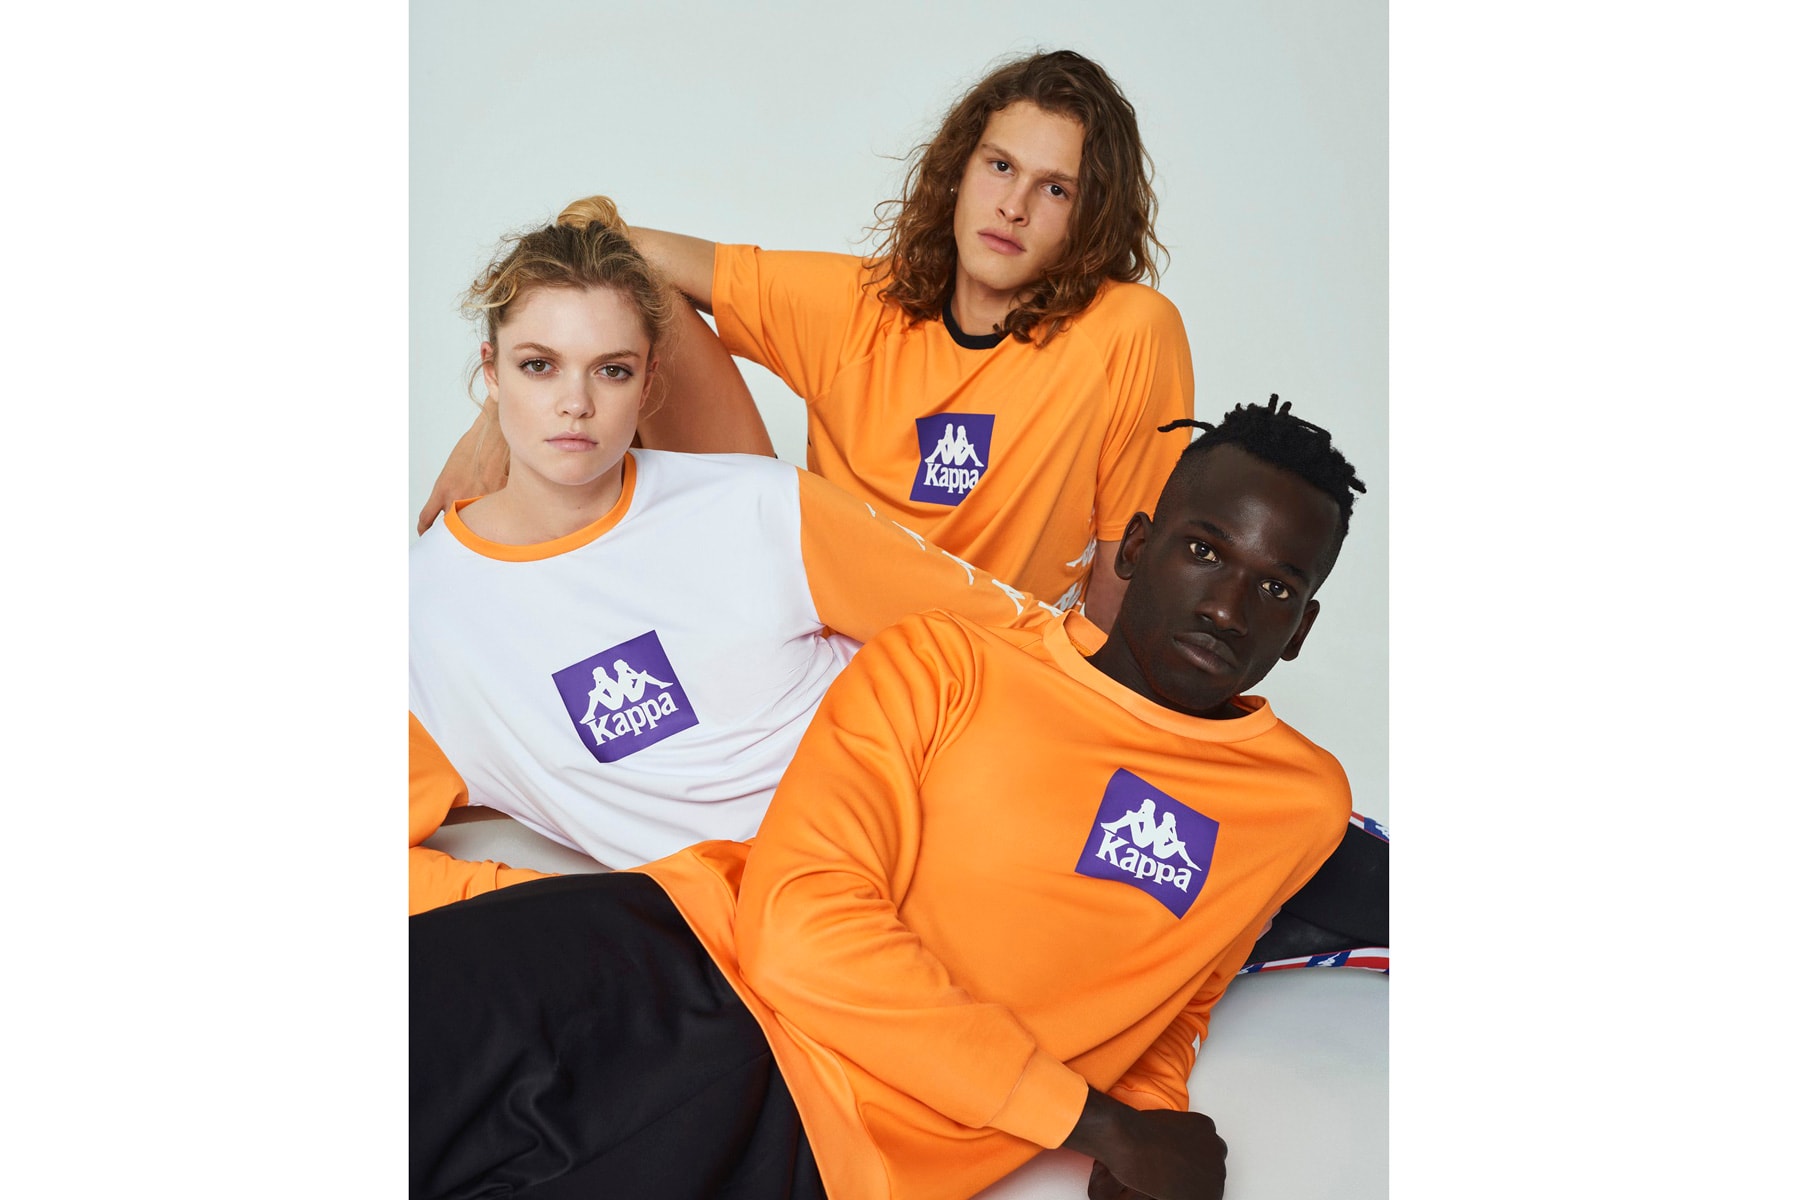 Kappa Fall/Winter 2019 Collection lookbooks football inspired looks track suits jackets 